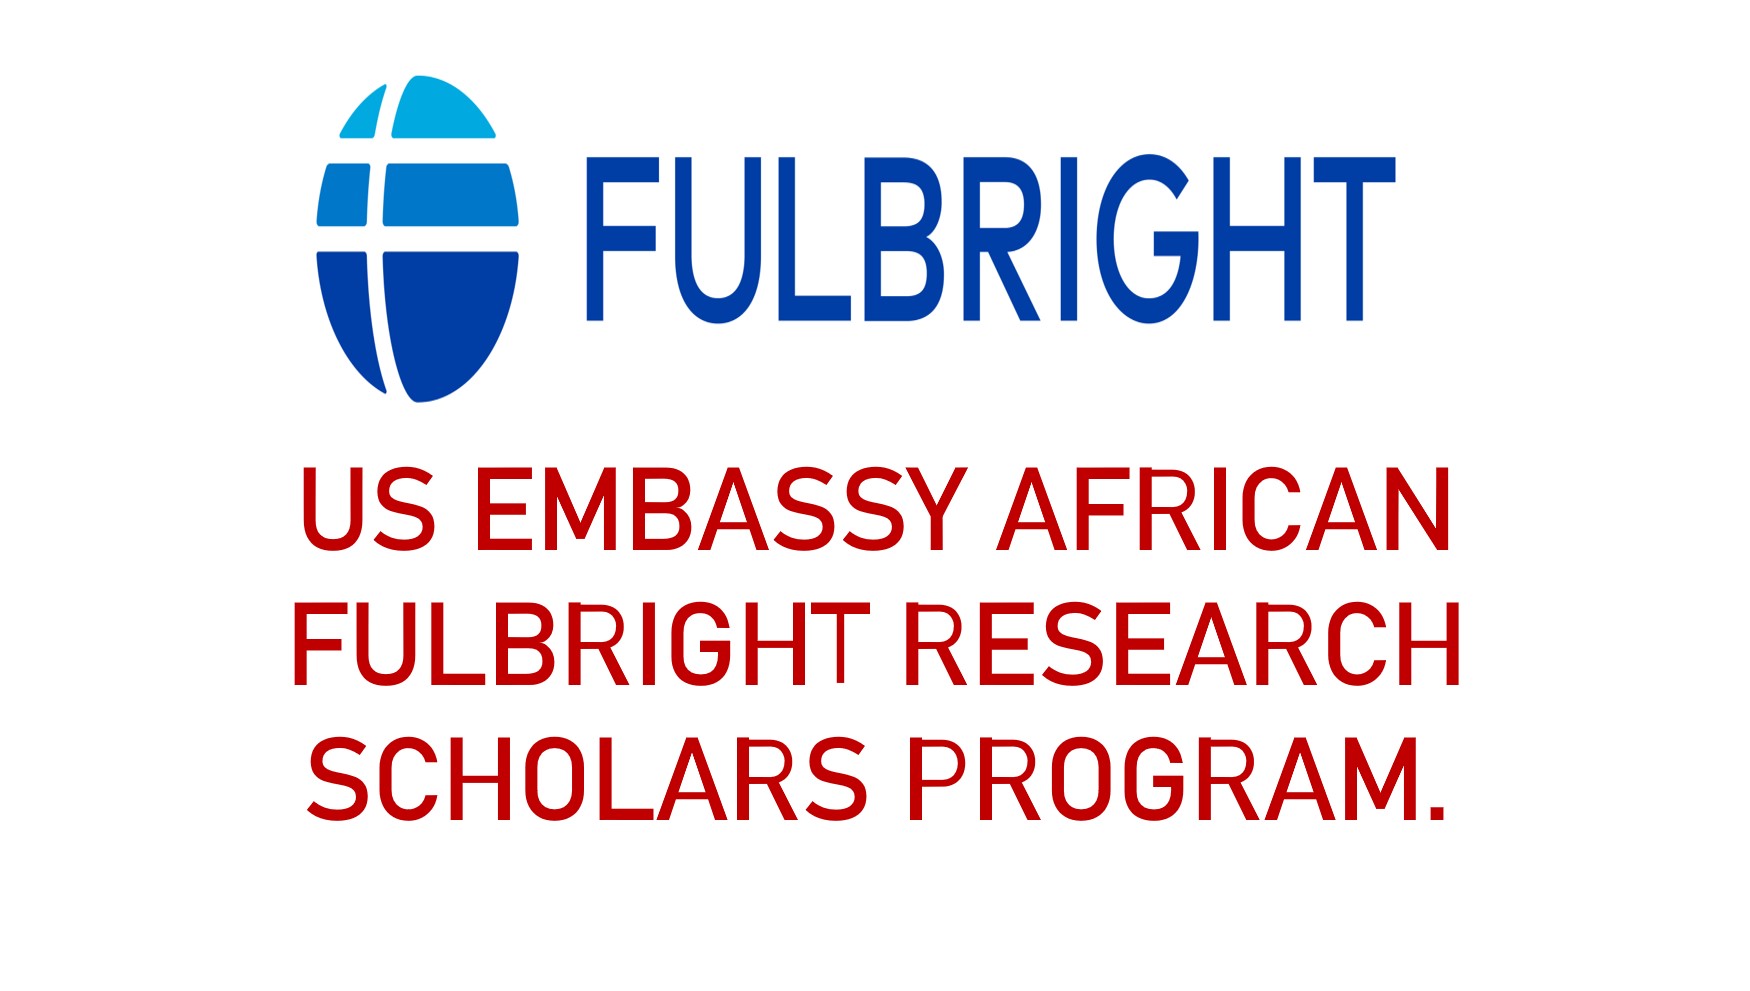 US Embassy African Fulbright Research